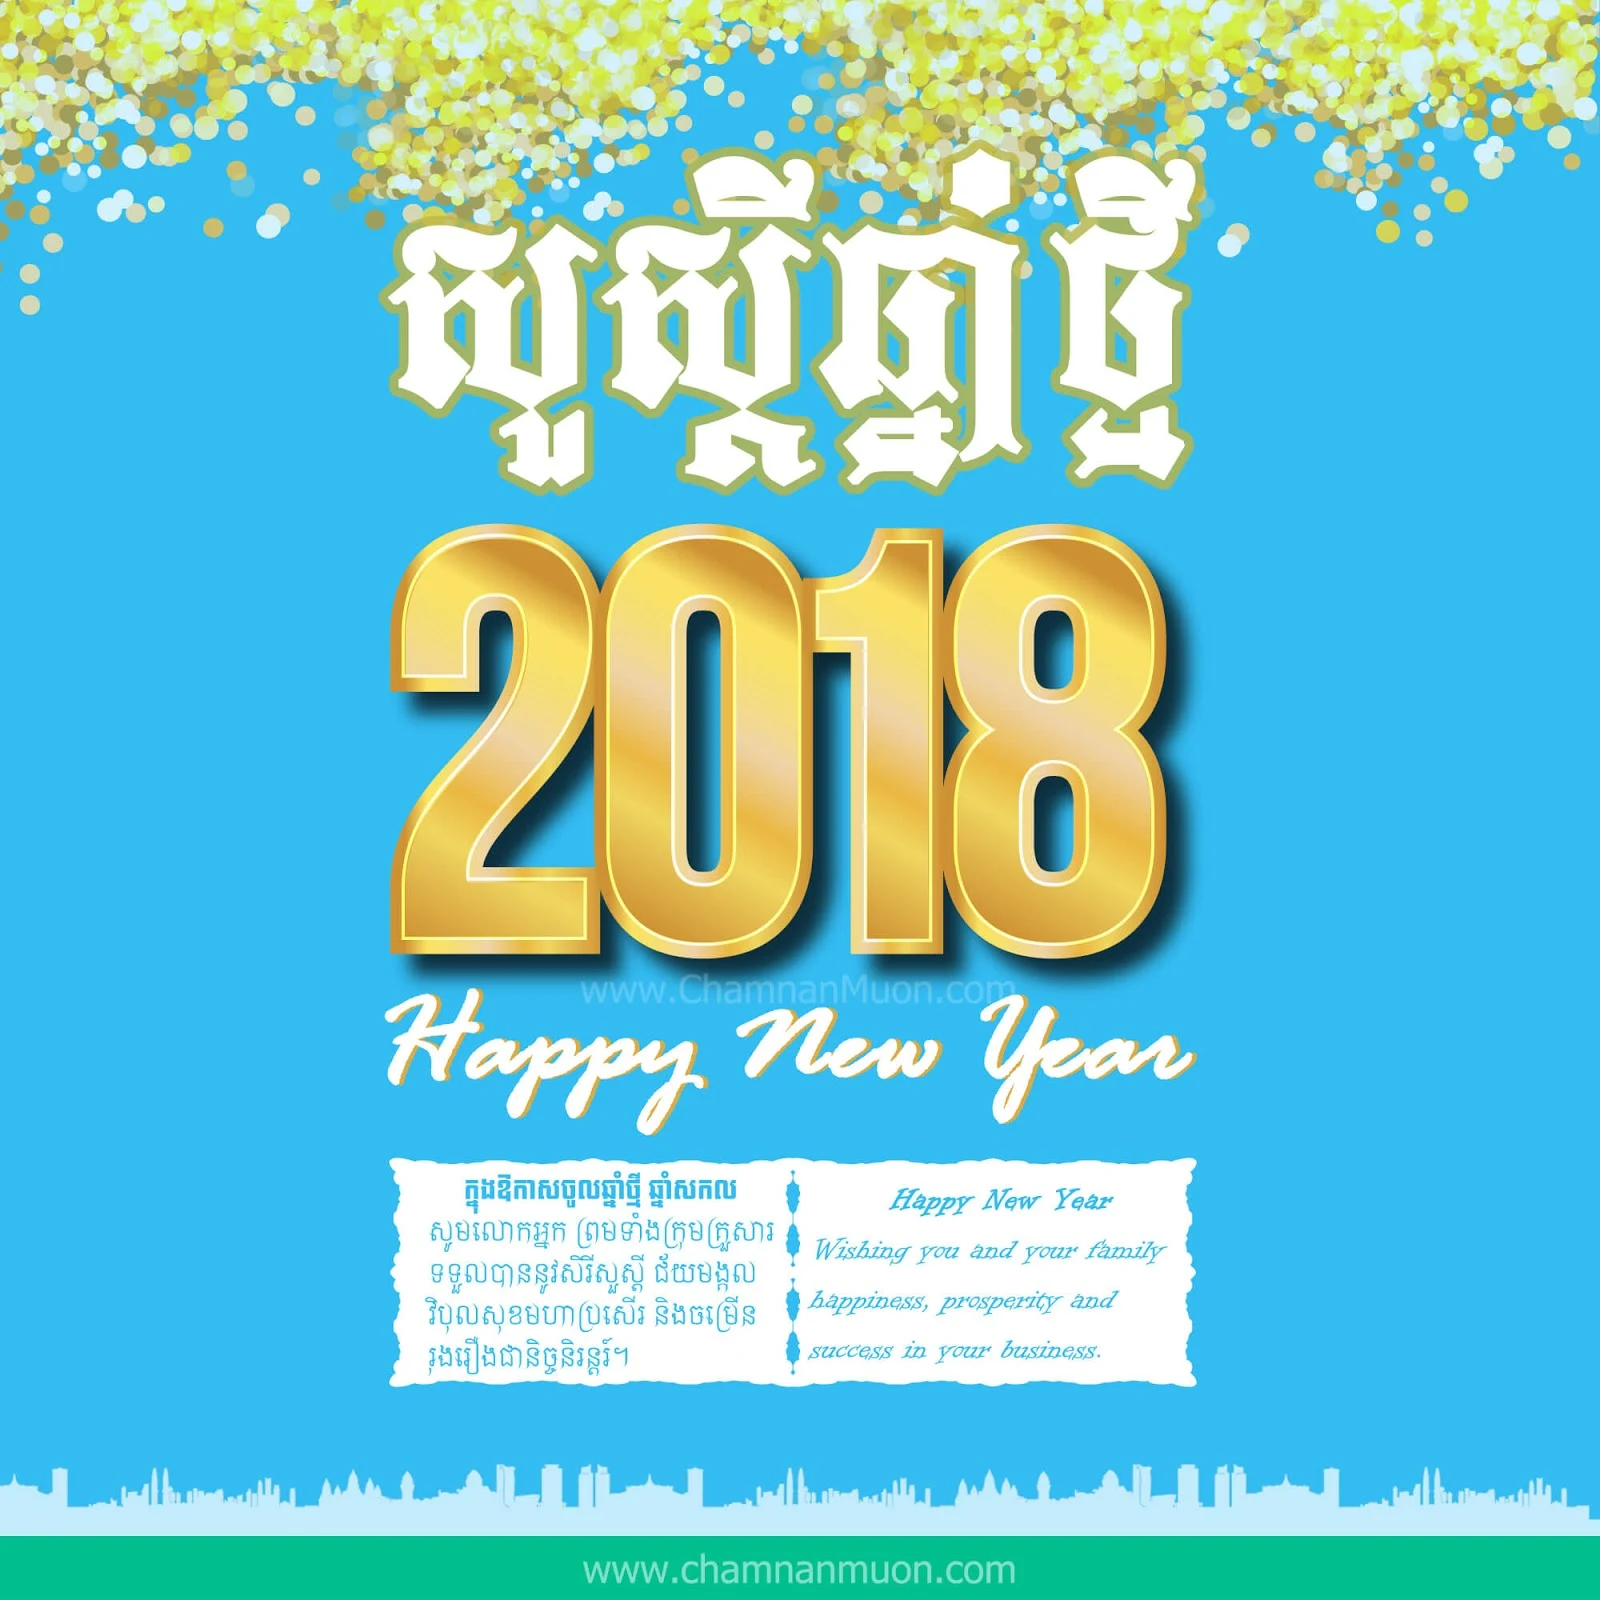 Happy New Year 2018 - Khmer greeting card by Chamnan